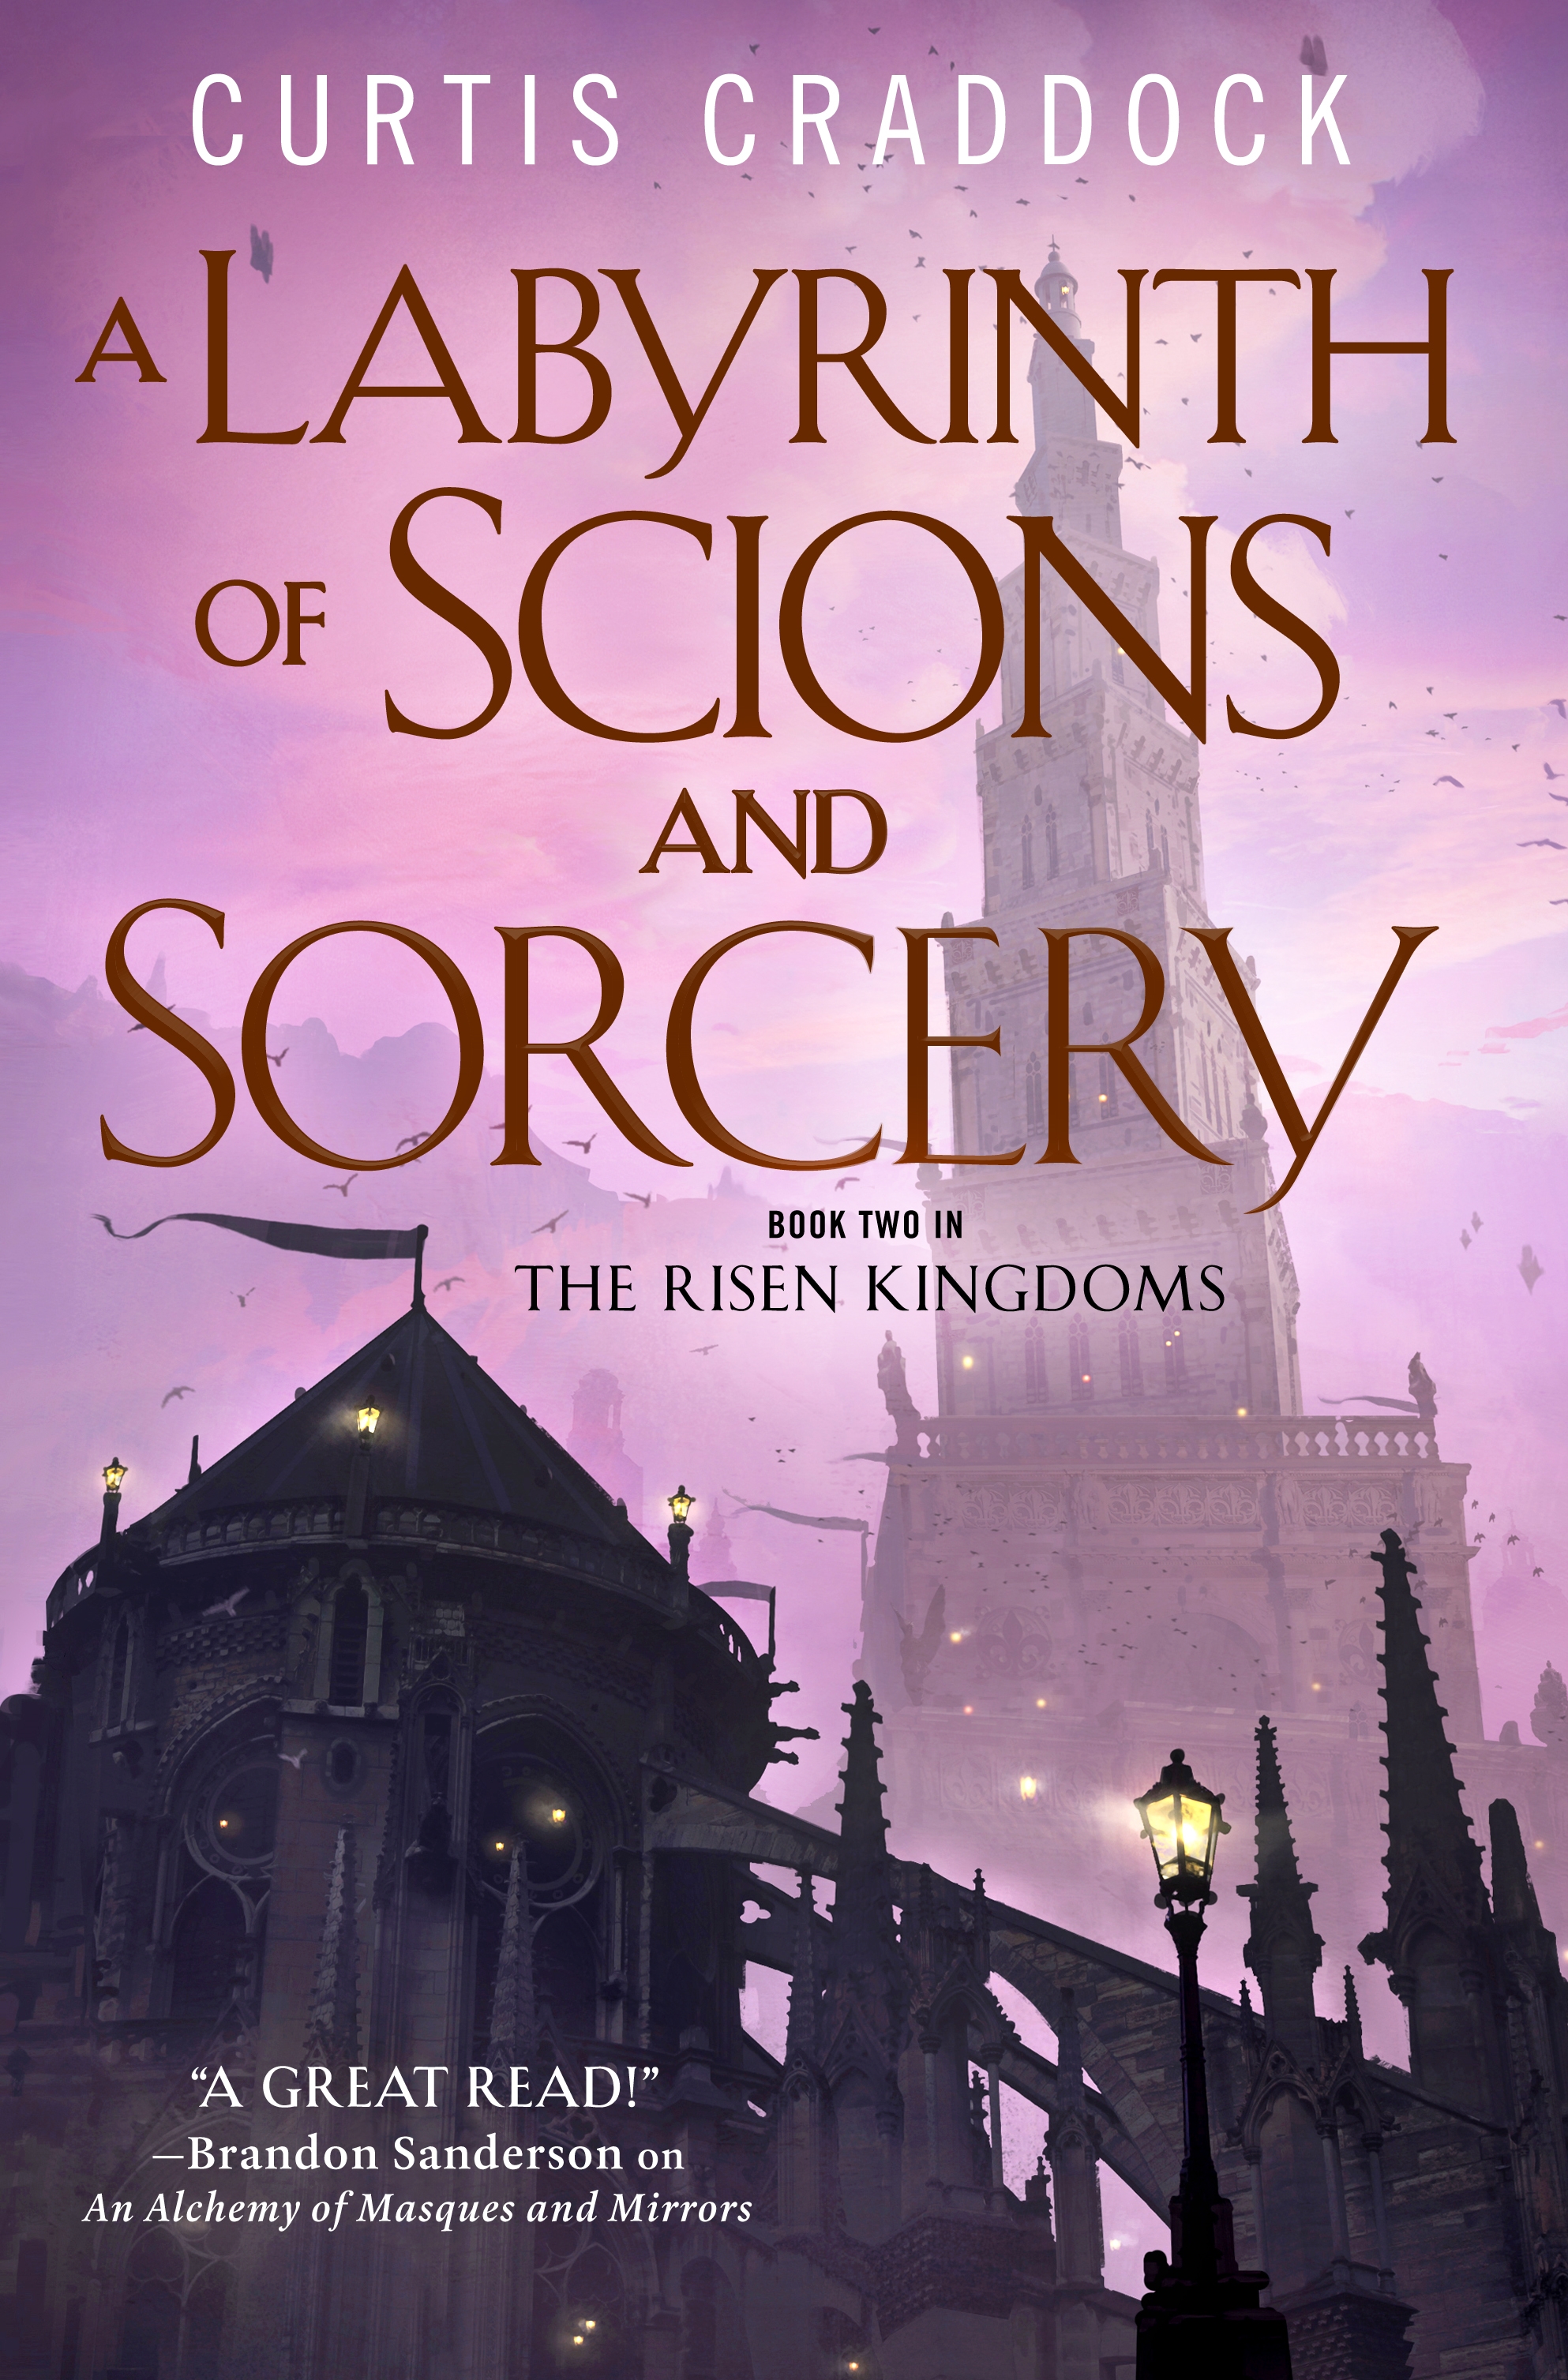 A Labyrinth of Scions and Sorcery : Book Two in the Risen Kingdoms by Curtis Craddock